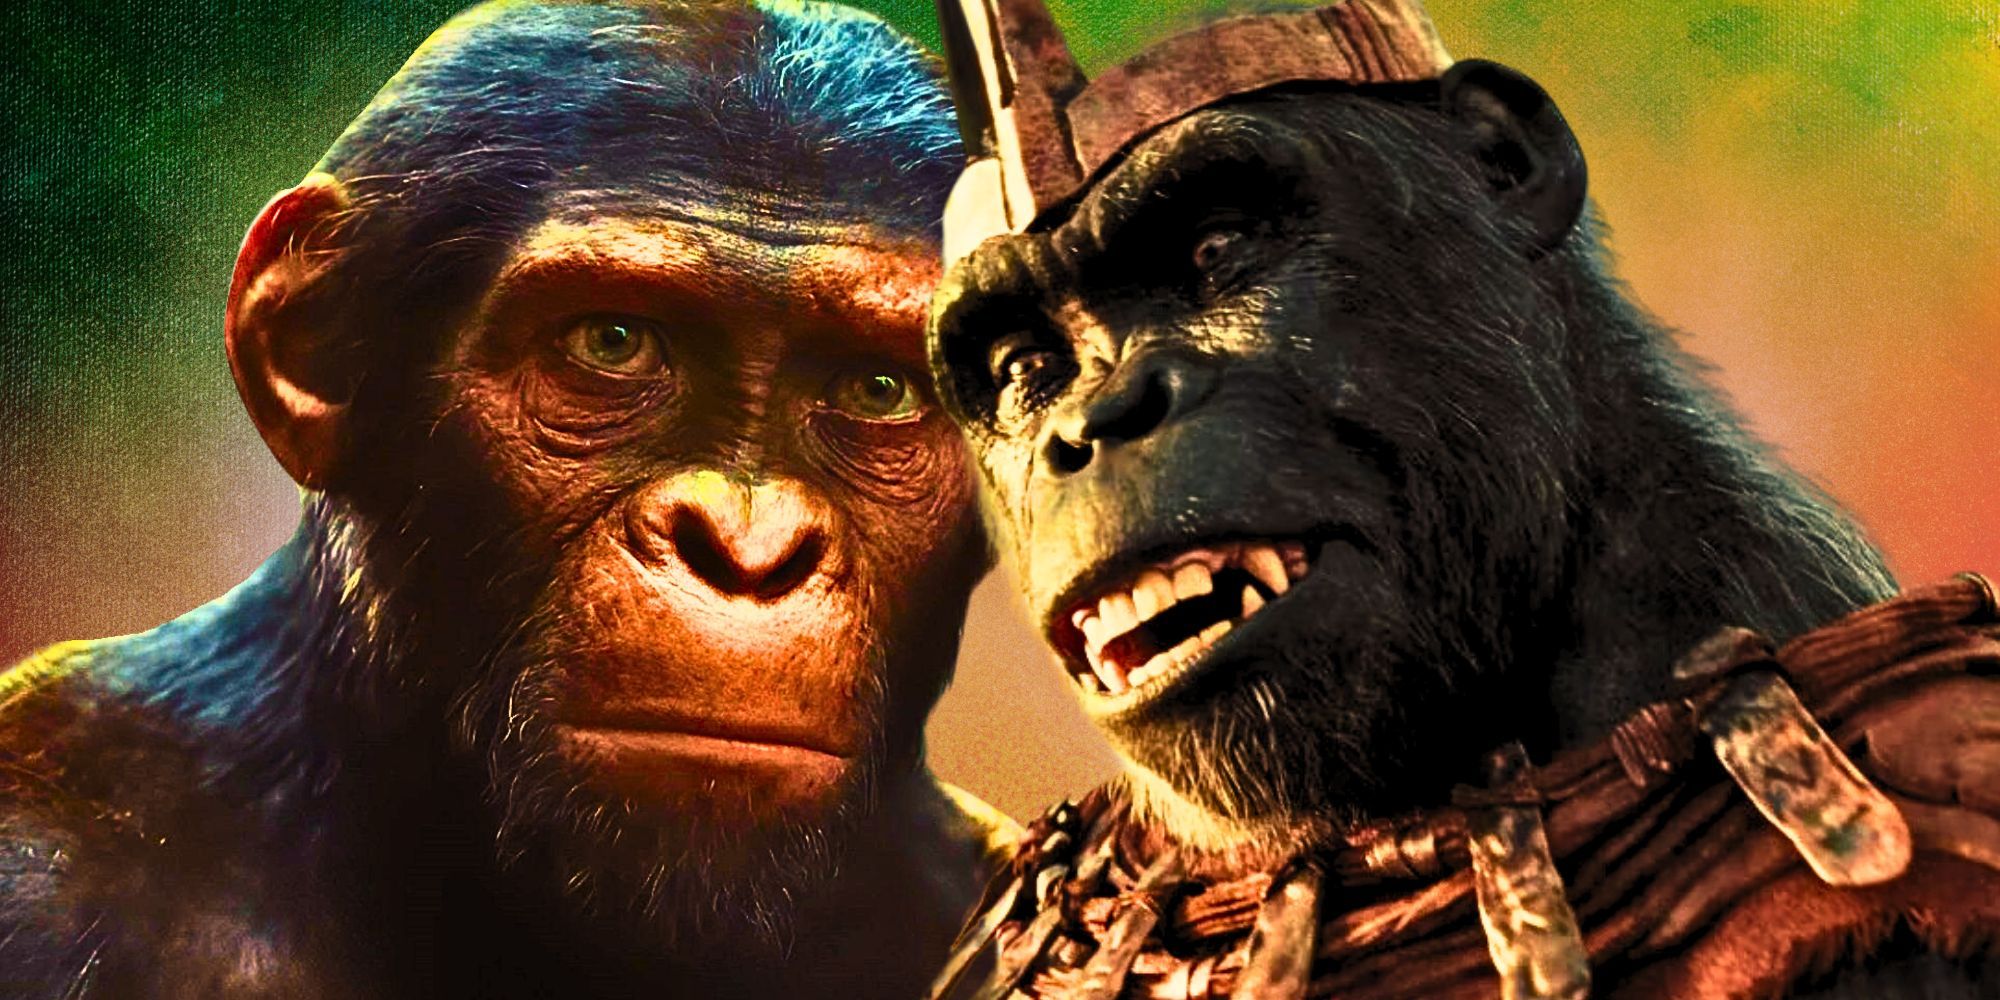 Kingdom Of The Planet Of The Apes Finally Restores A Missing Part Of The Original Movies